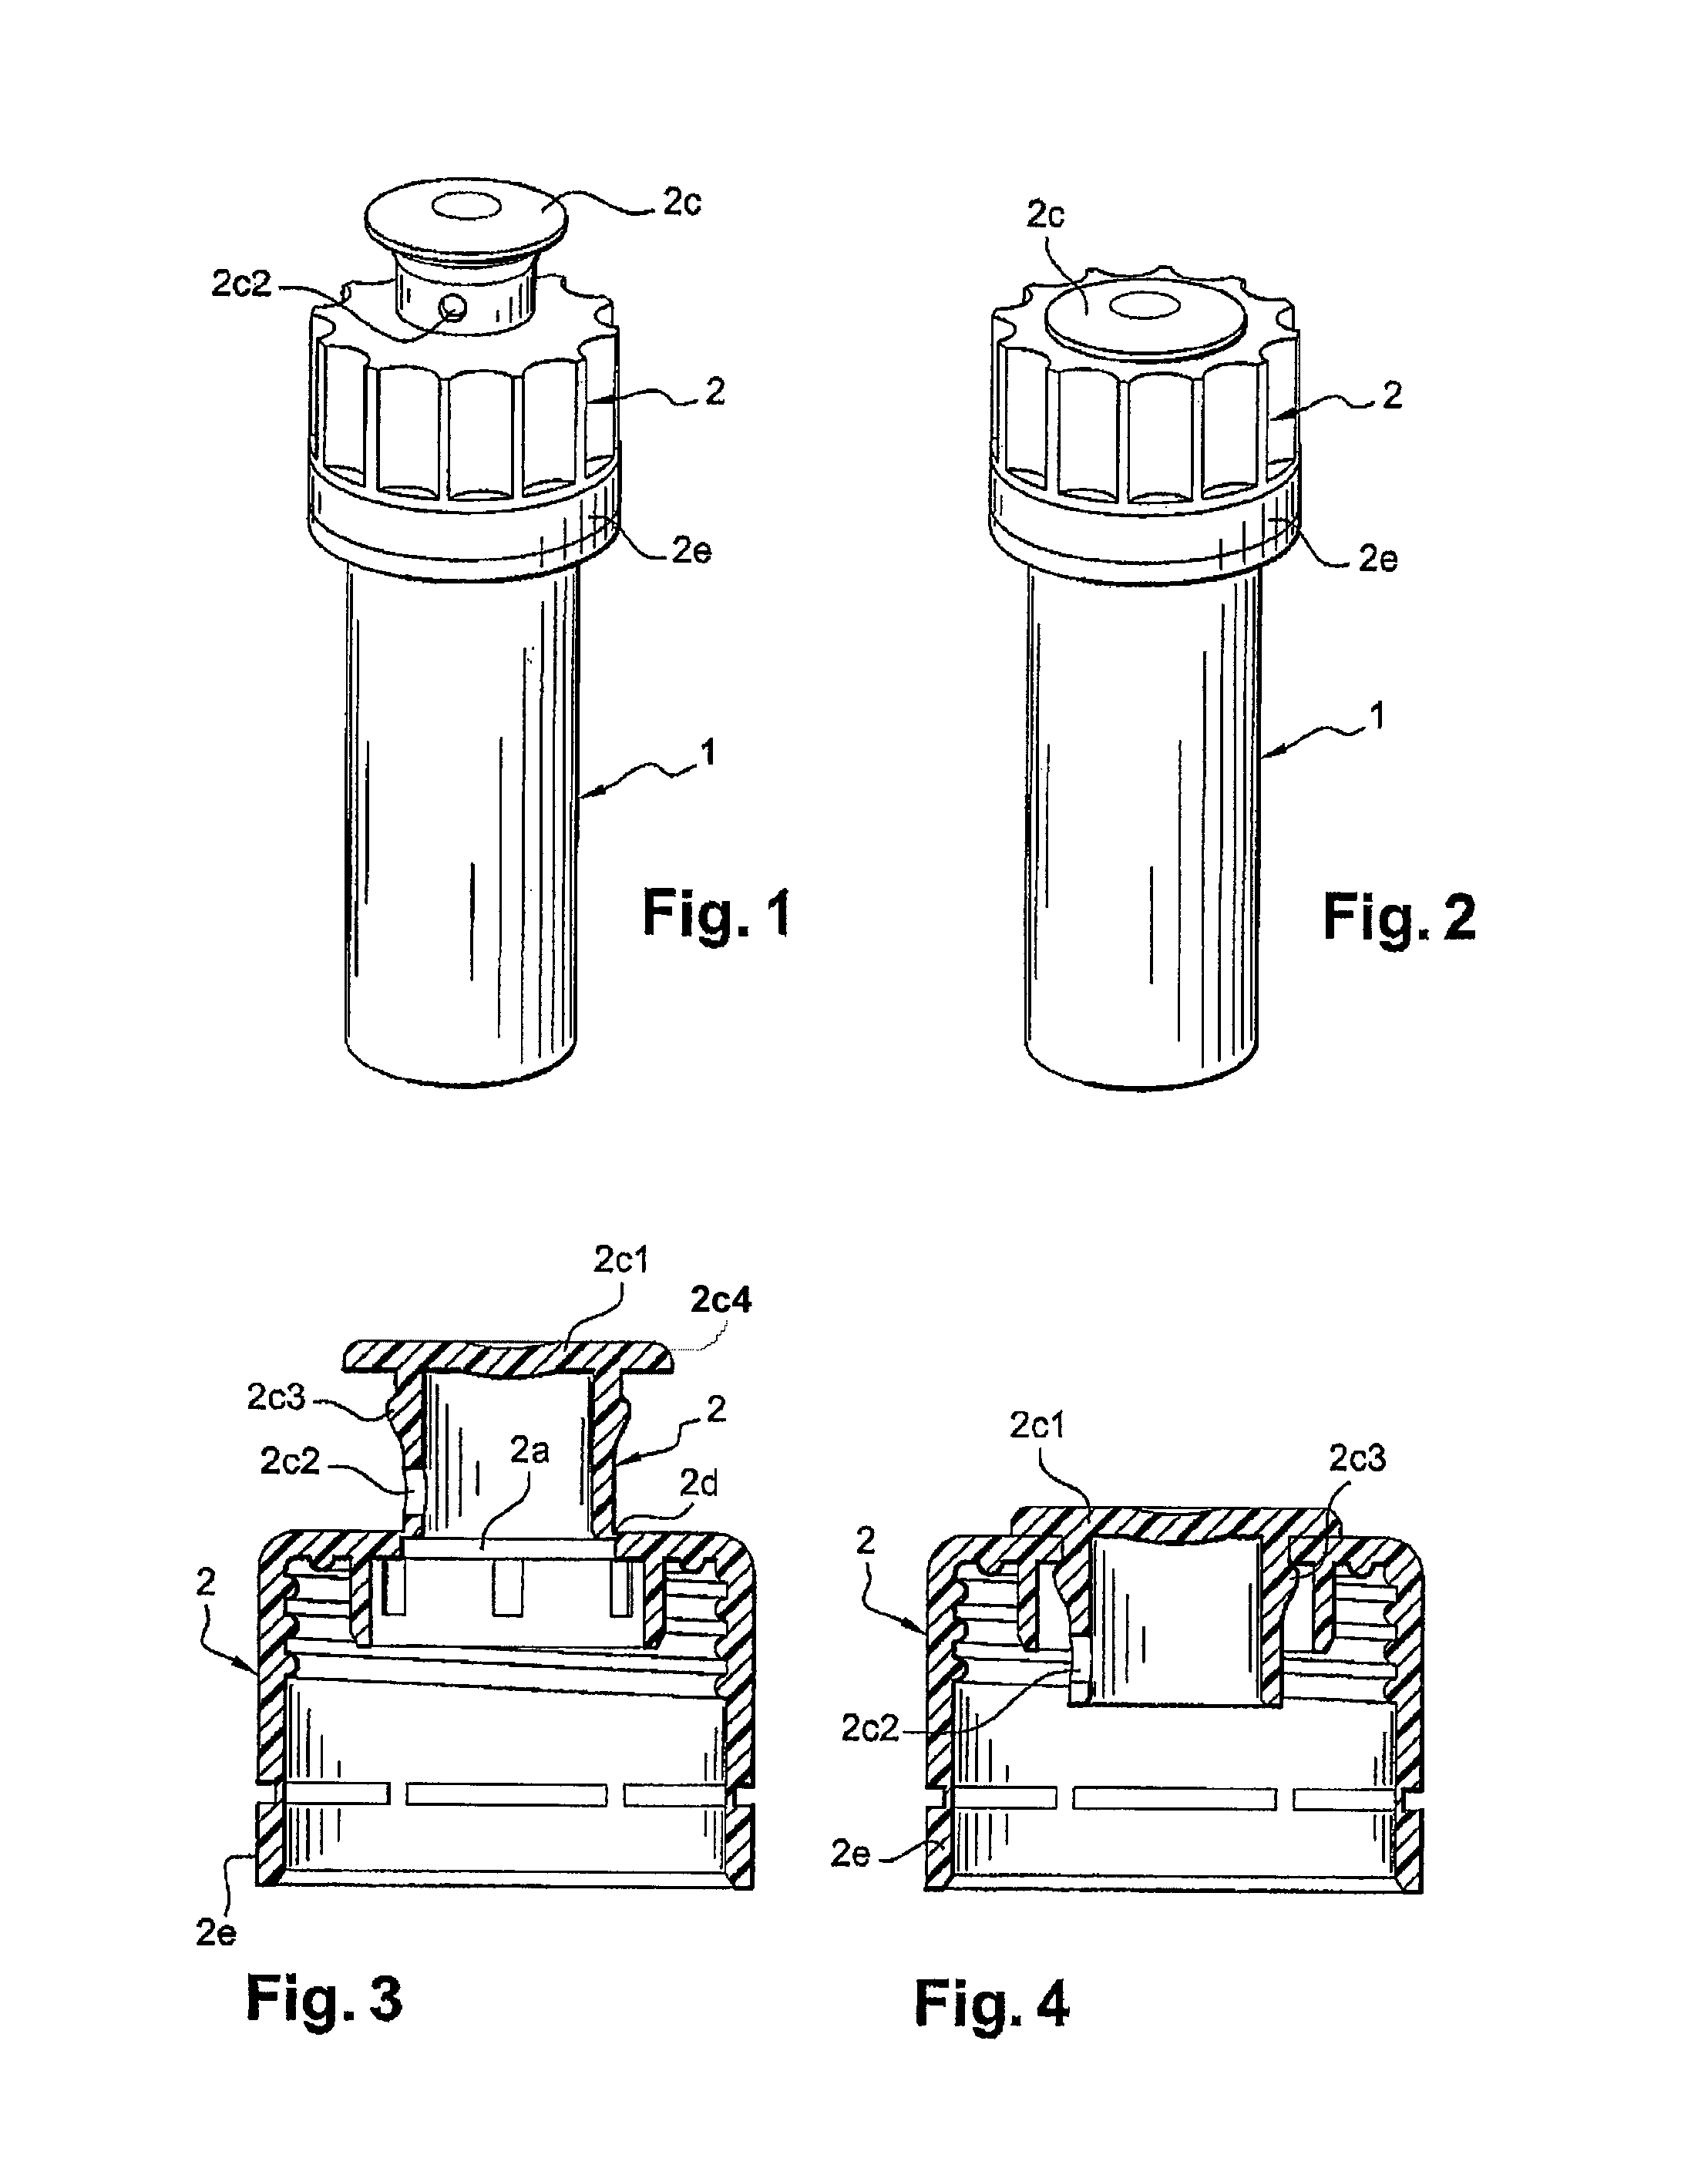 Vial for receiving a predefined dose of a liquid